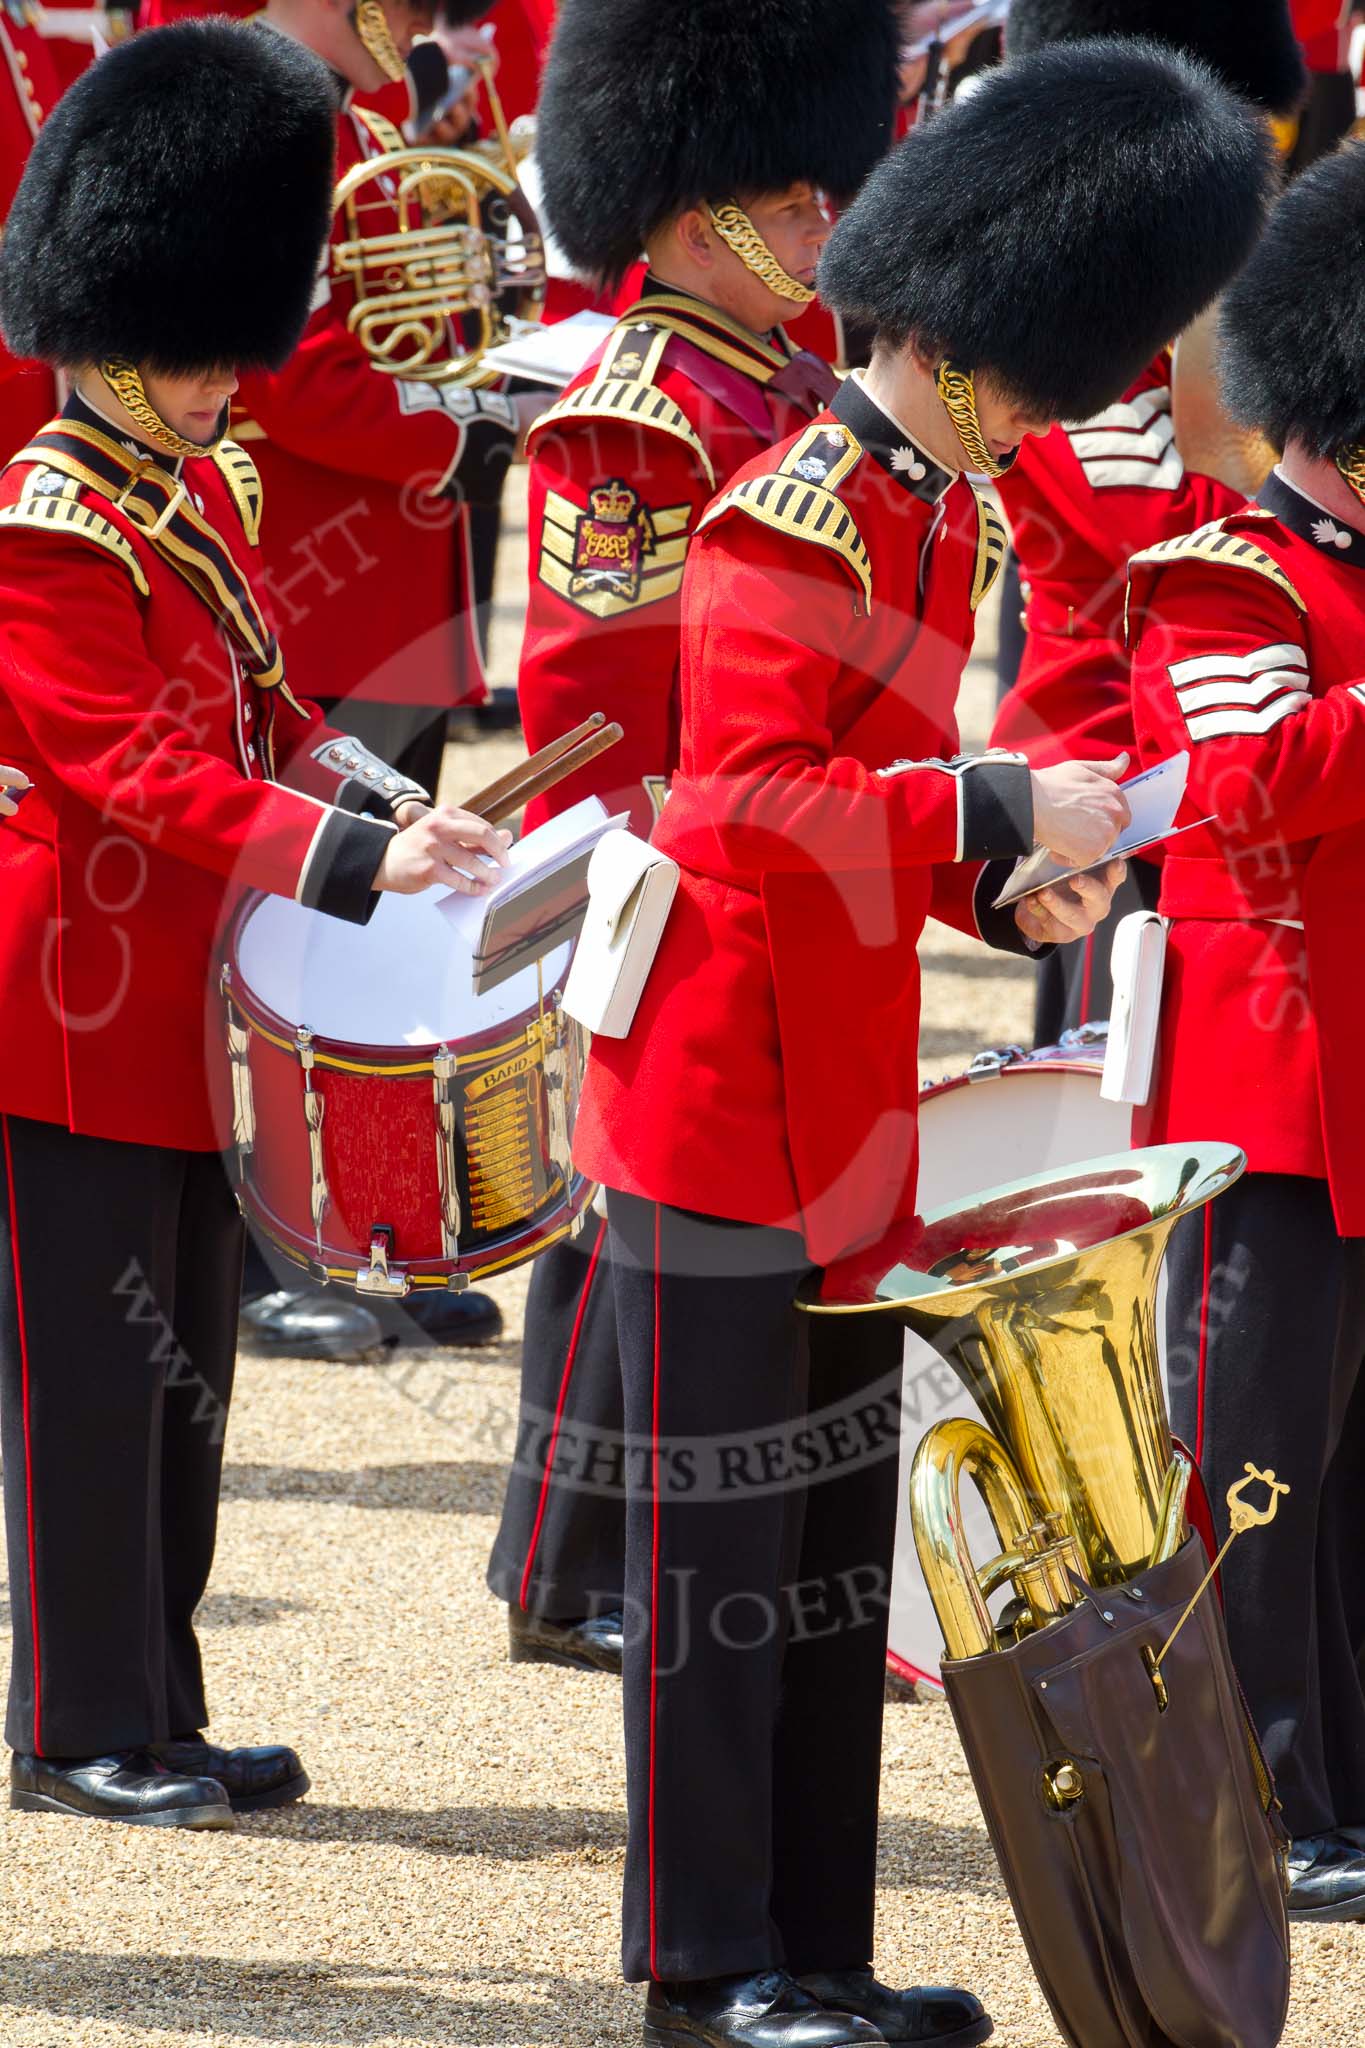 The Colonel's Review 2011: Close-up of a Trombonist and a Drummer of the Grenadier Guards..
Horse Guards Parade, Westminster,
London SW1,

United Kingdom,
on 04 June 2011 at 12:03, image #277